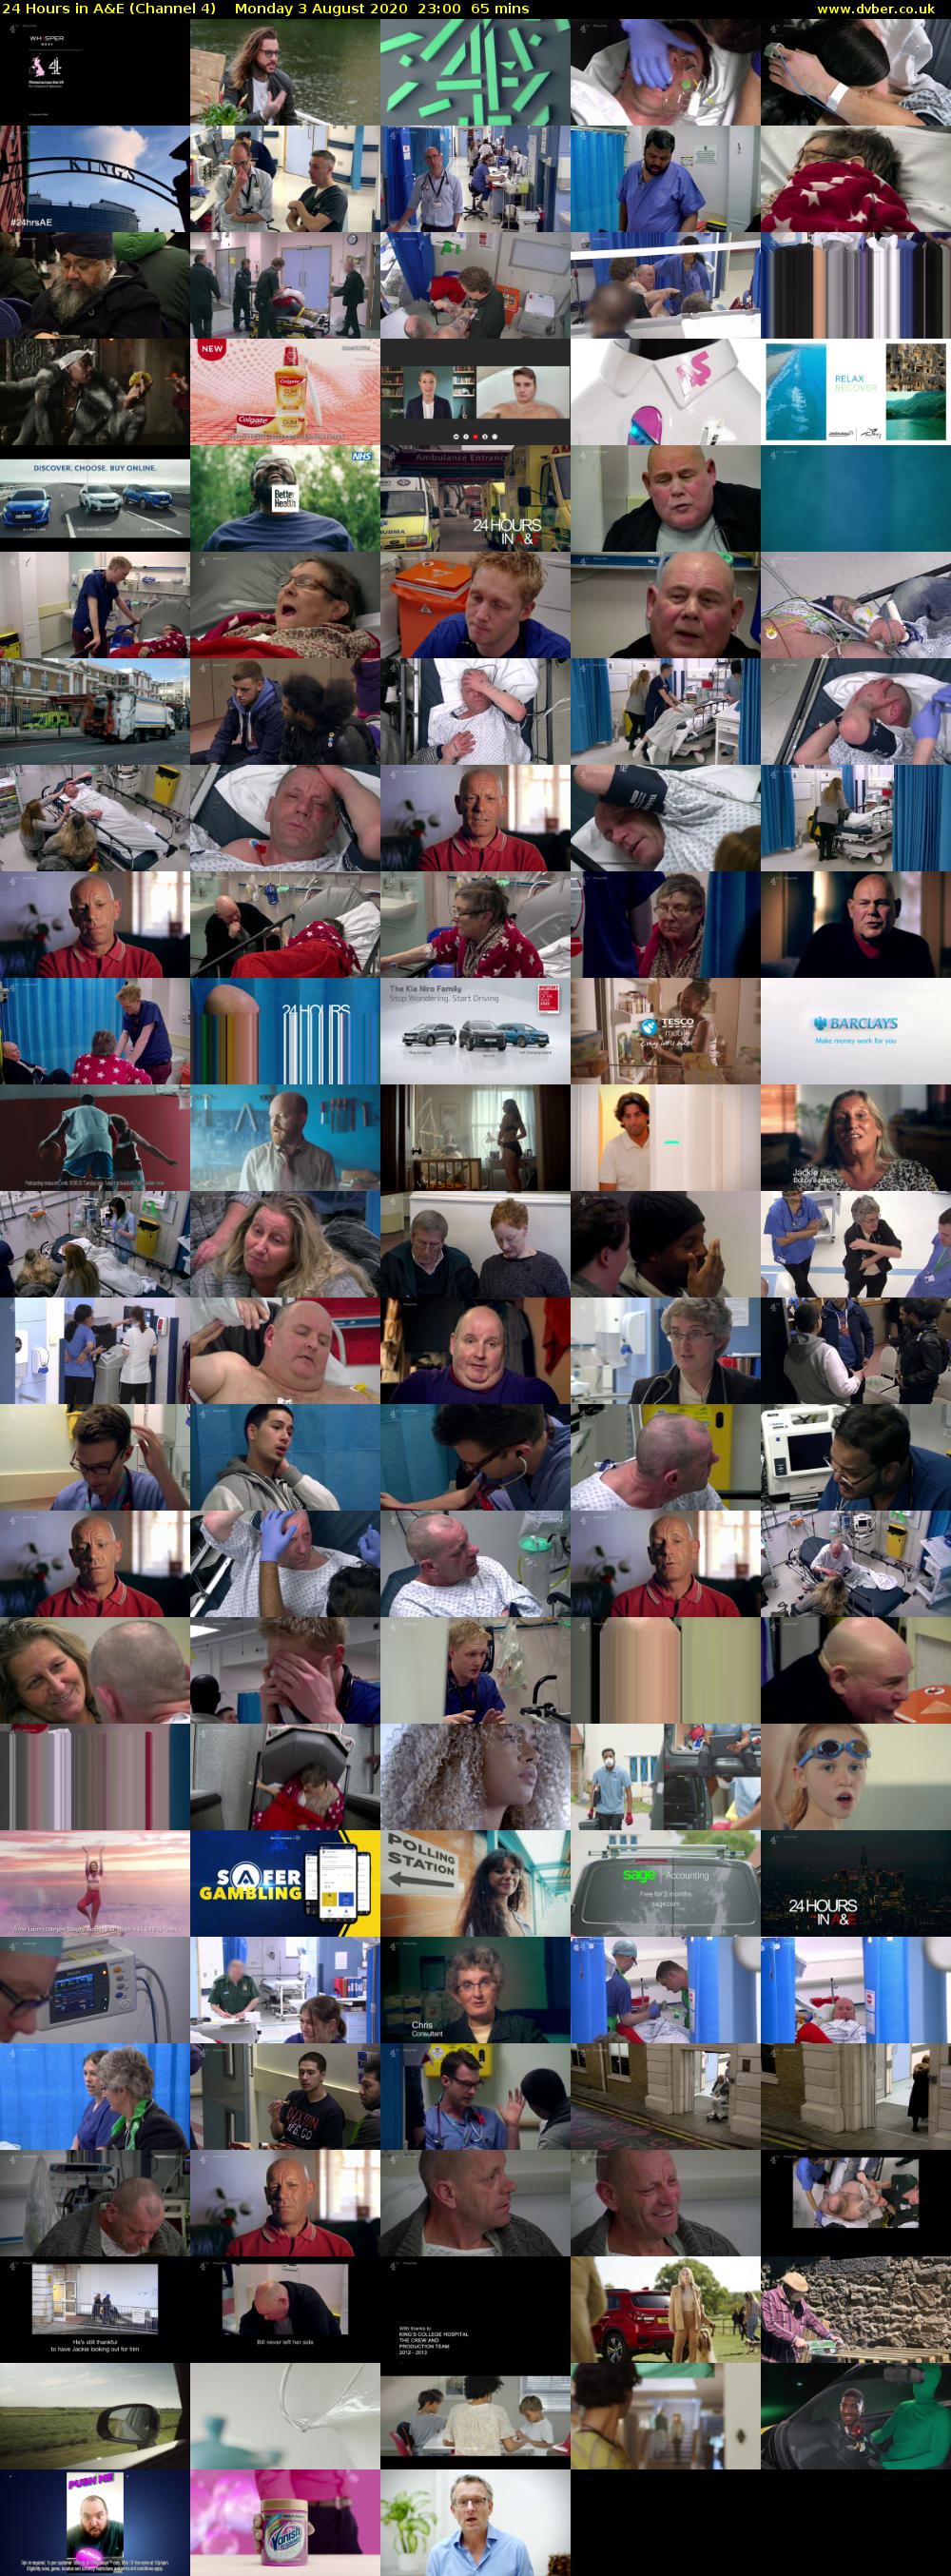 24 Hours in A&E (Channel 4) Monday 3 August 2020 23:00 - 00:05